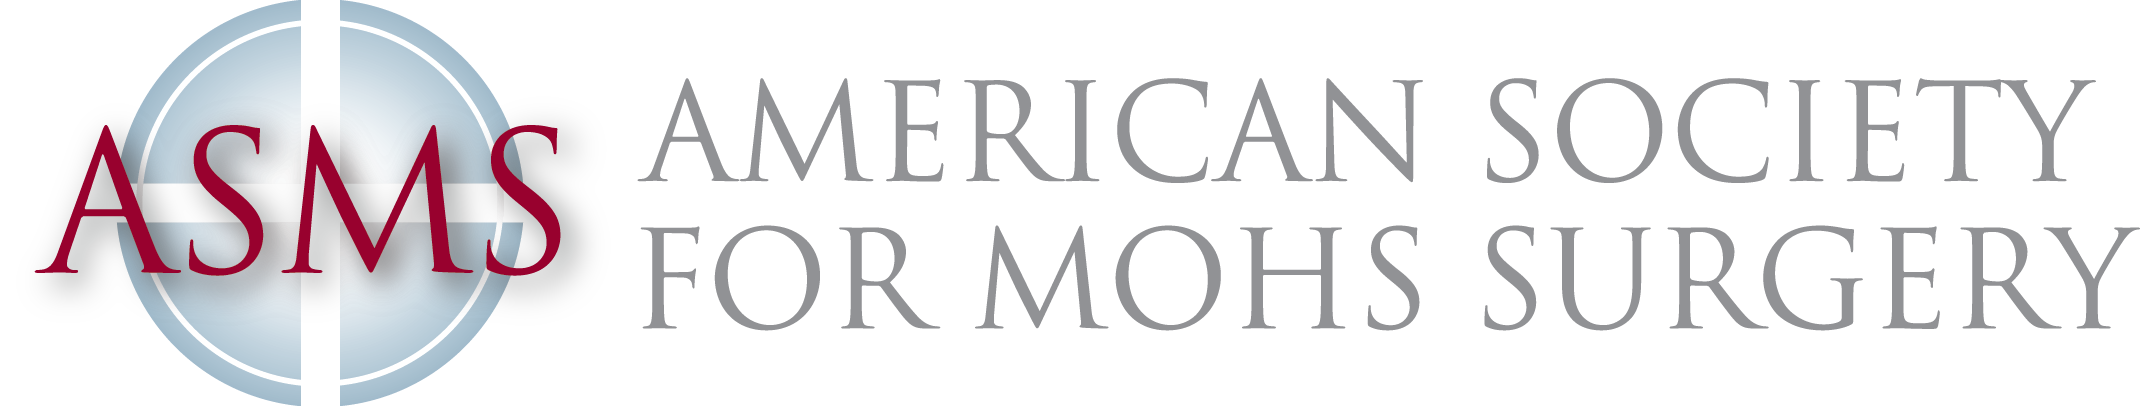 American Society for Mohs Surgery logo